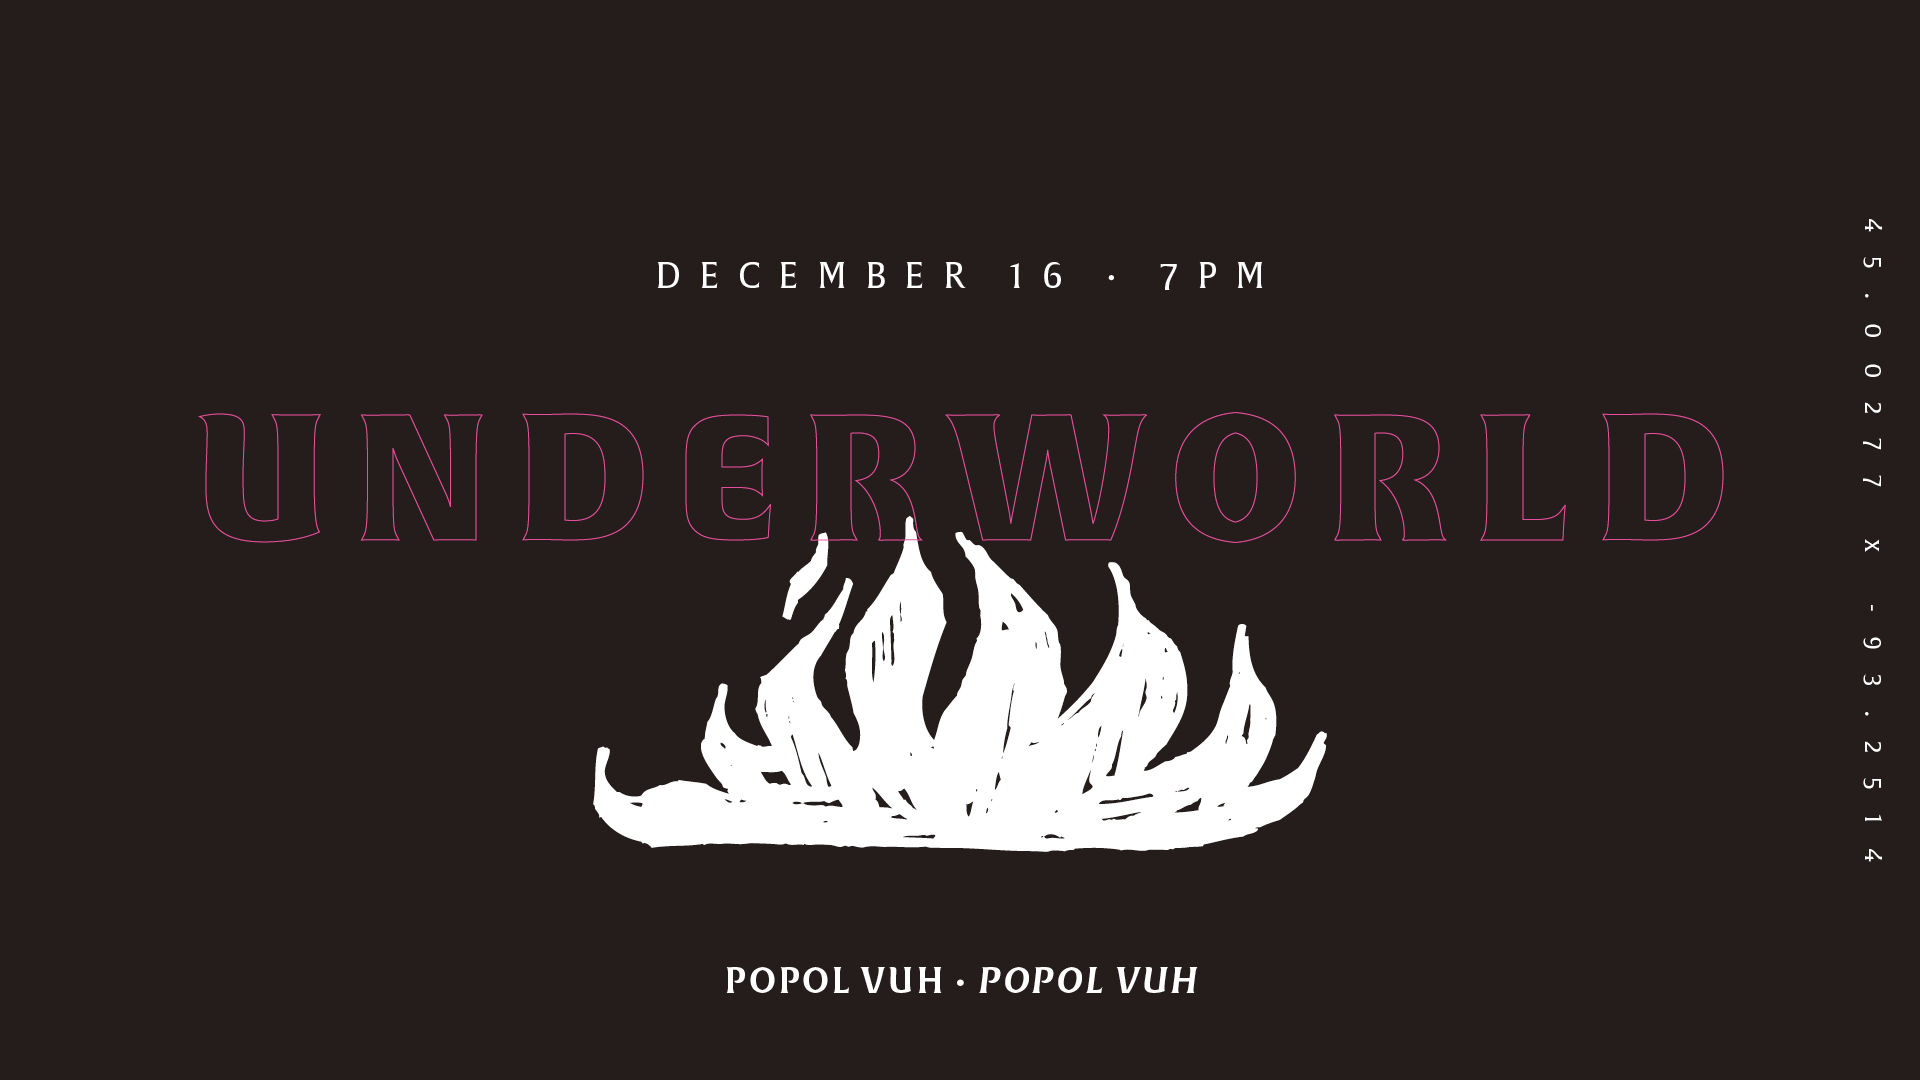 Cover image of second event, Underworld